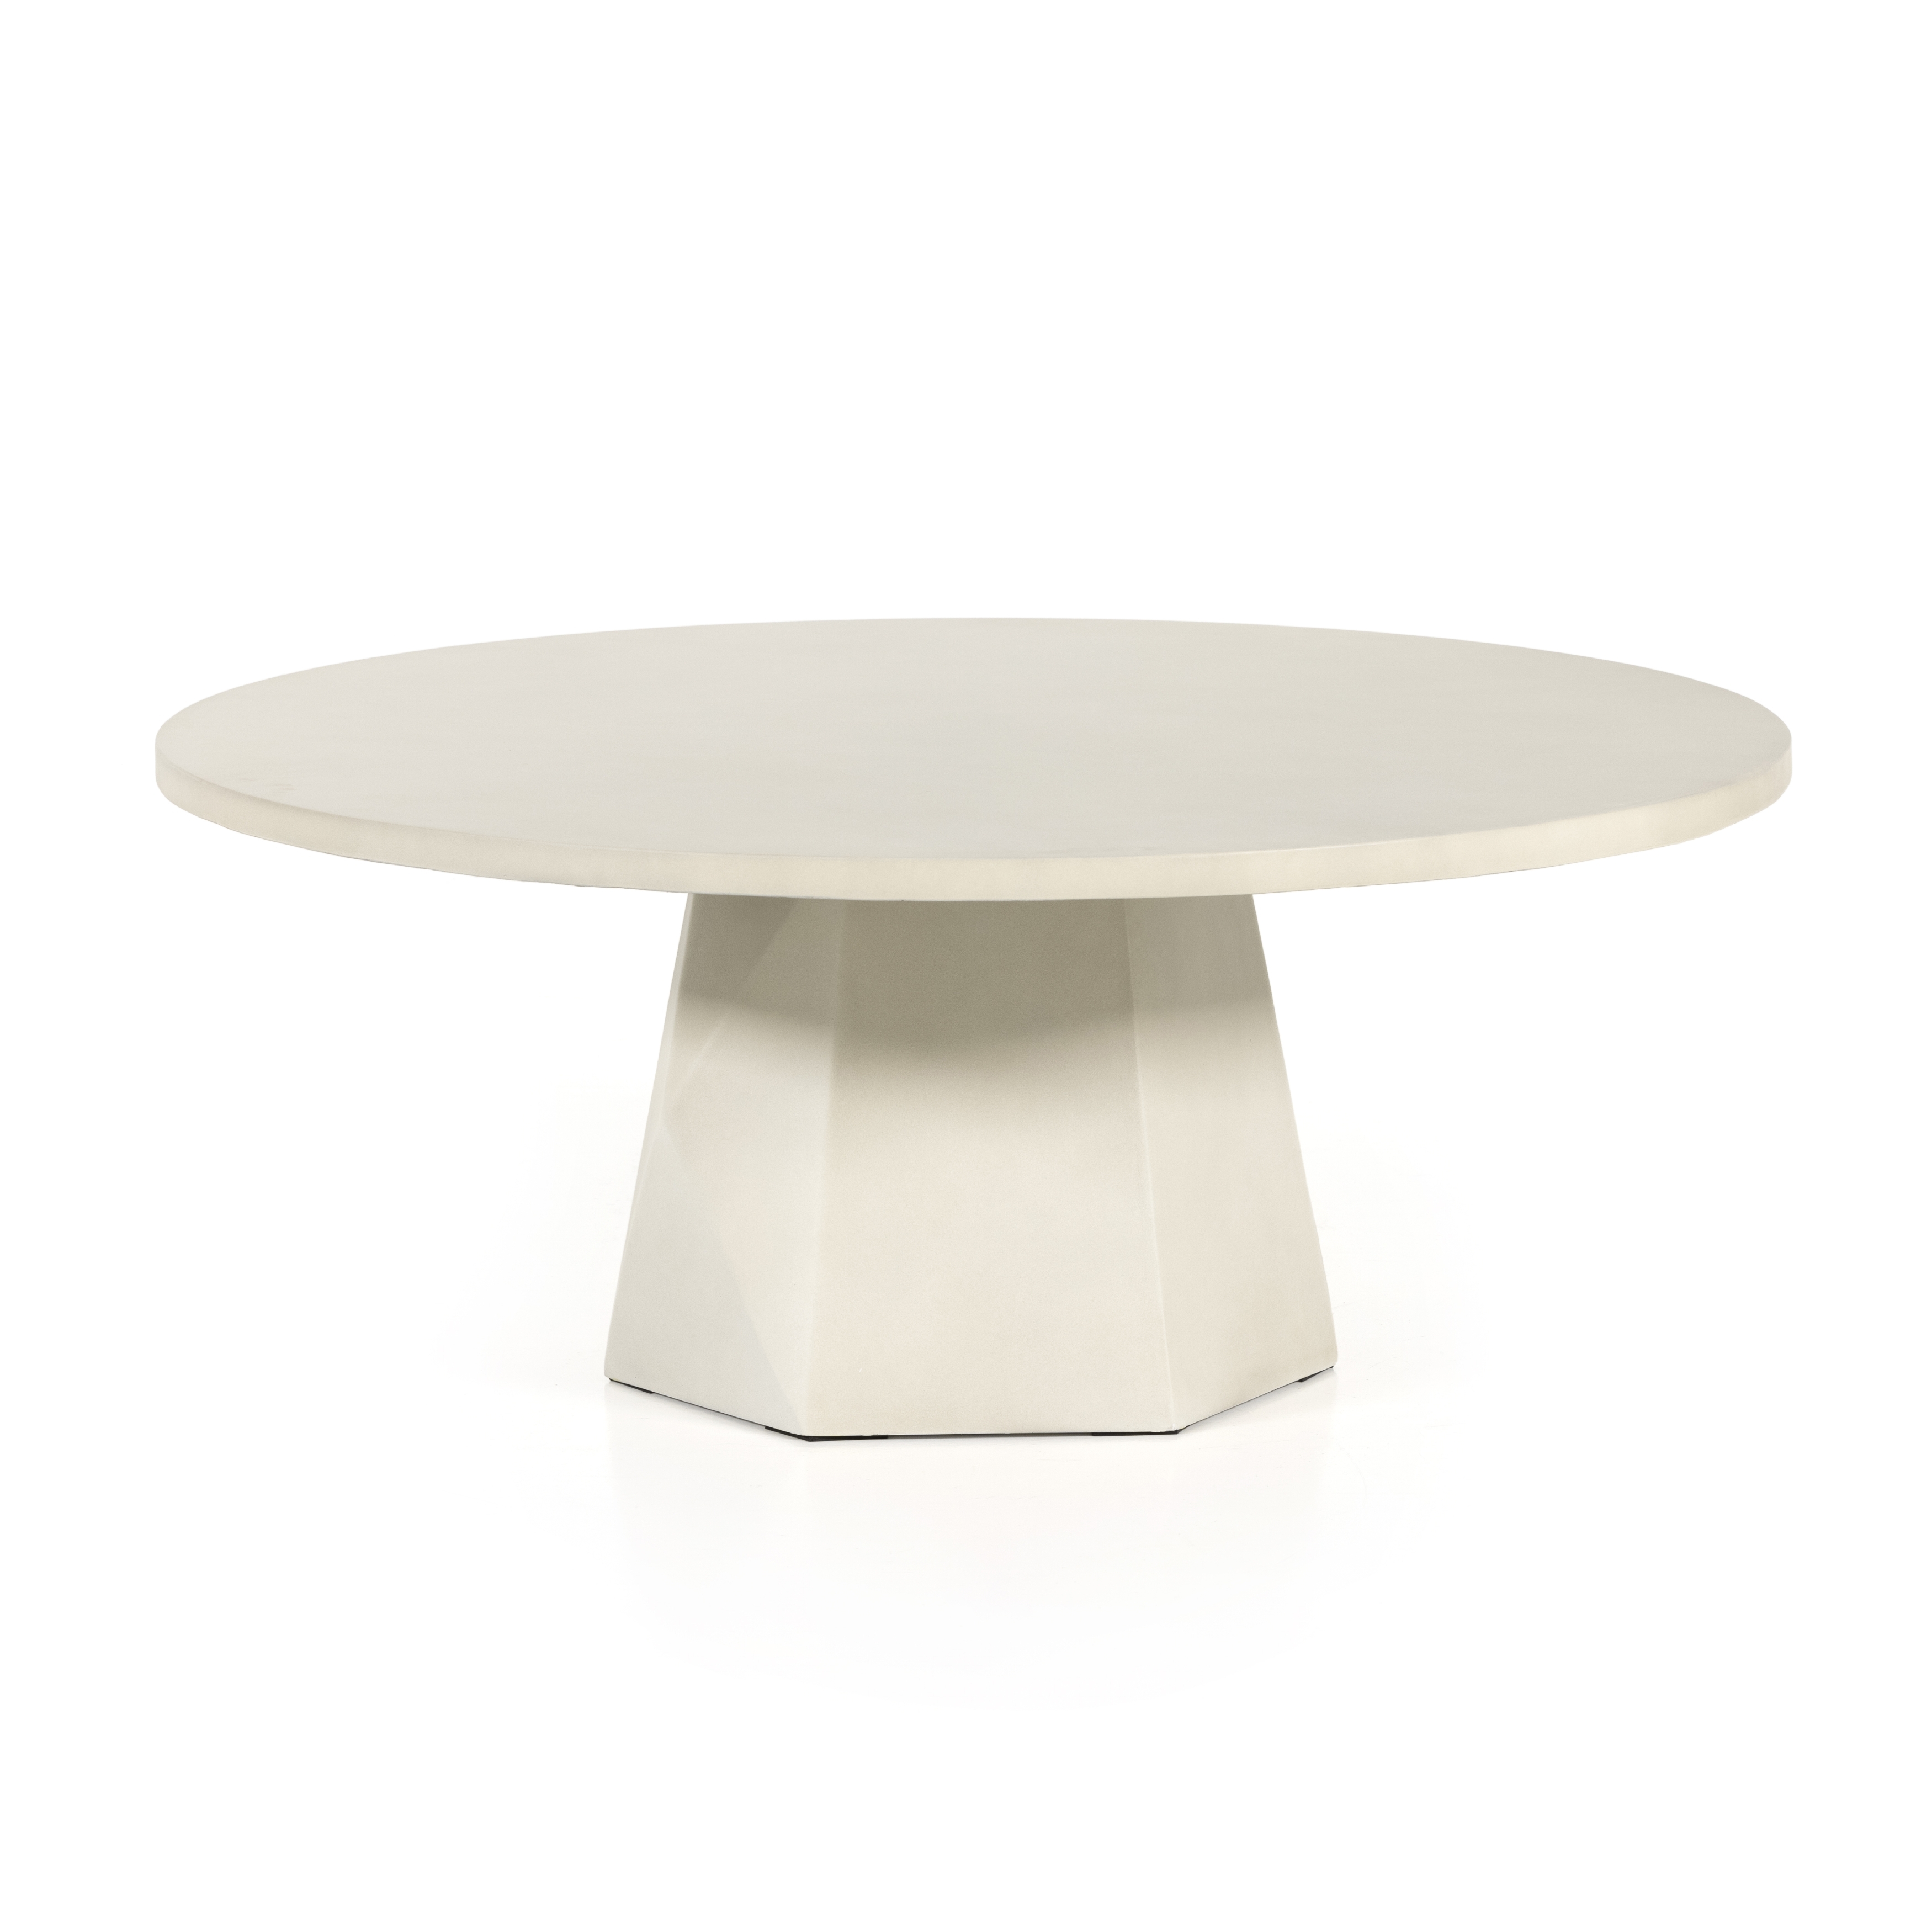 Bowman Outdoor Coffee Table-White Cncrt - Image 3